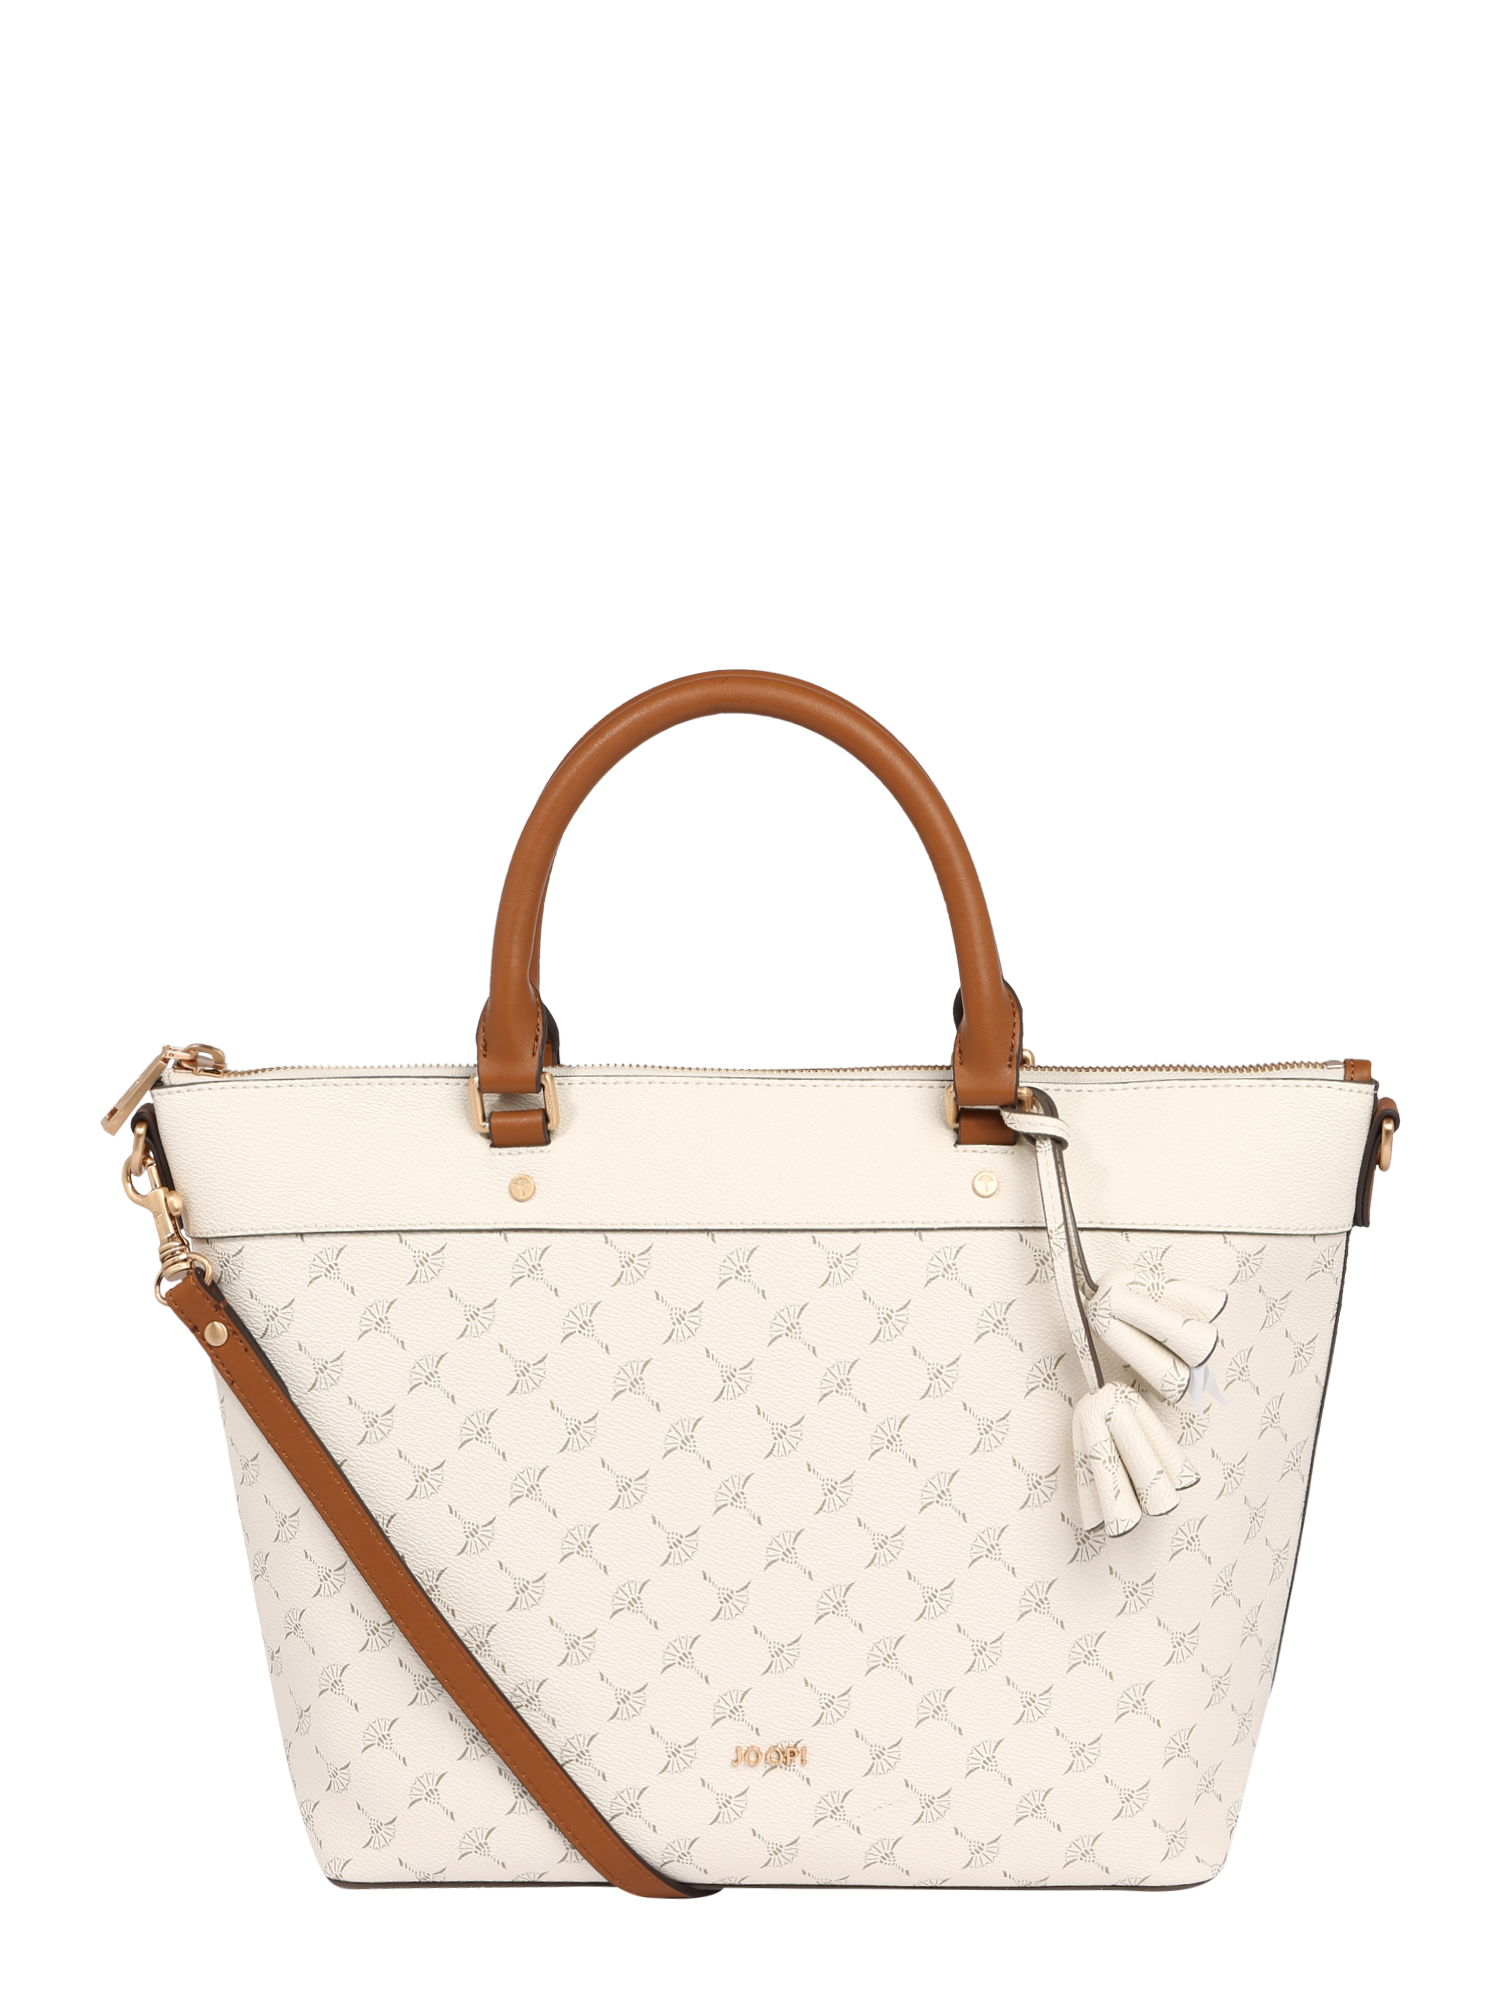 nGsns Donna JOOP  Borsa a mano Thoosa in Offwhite 